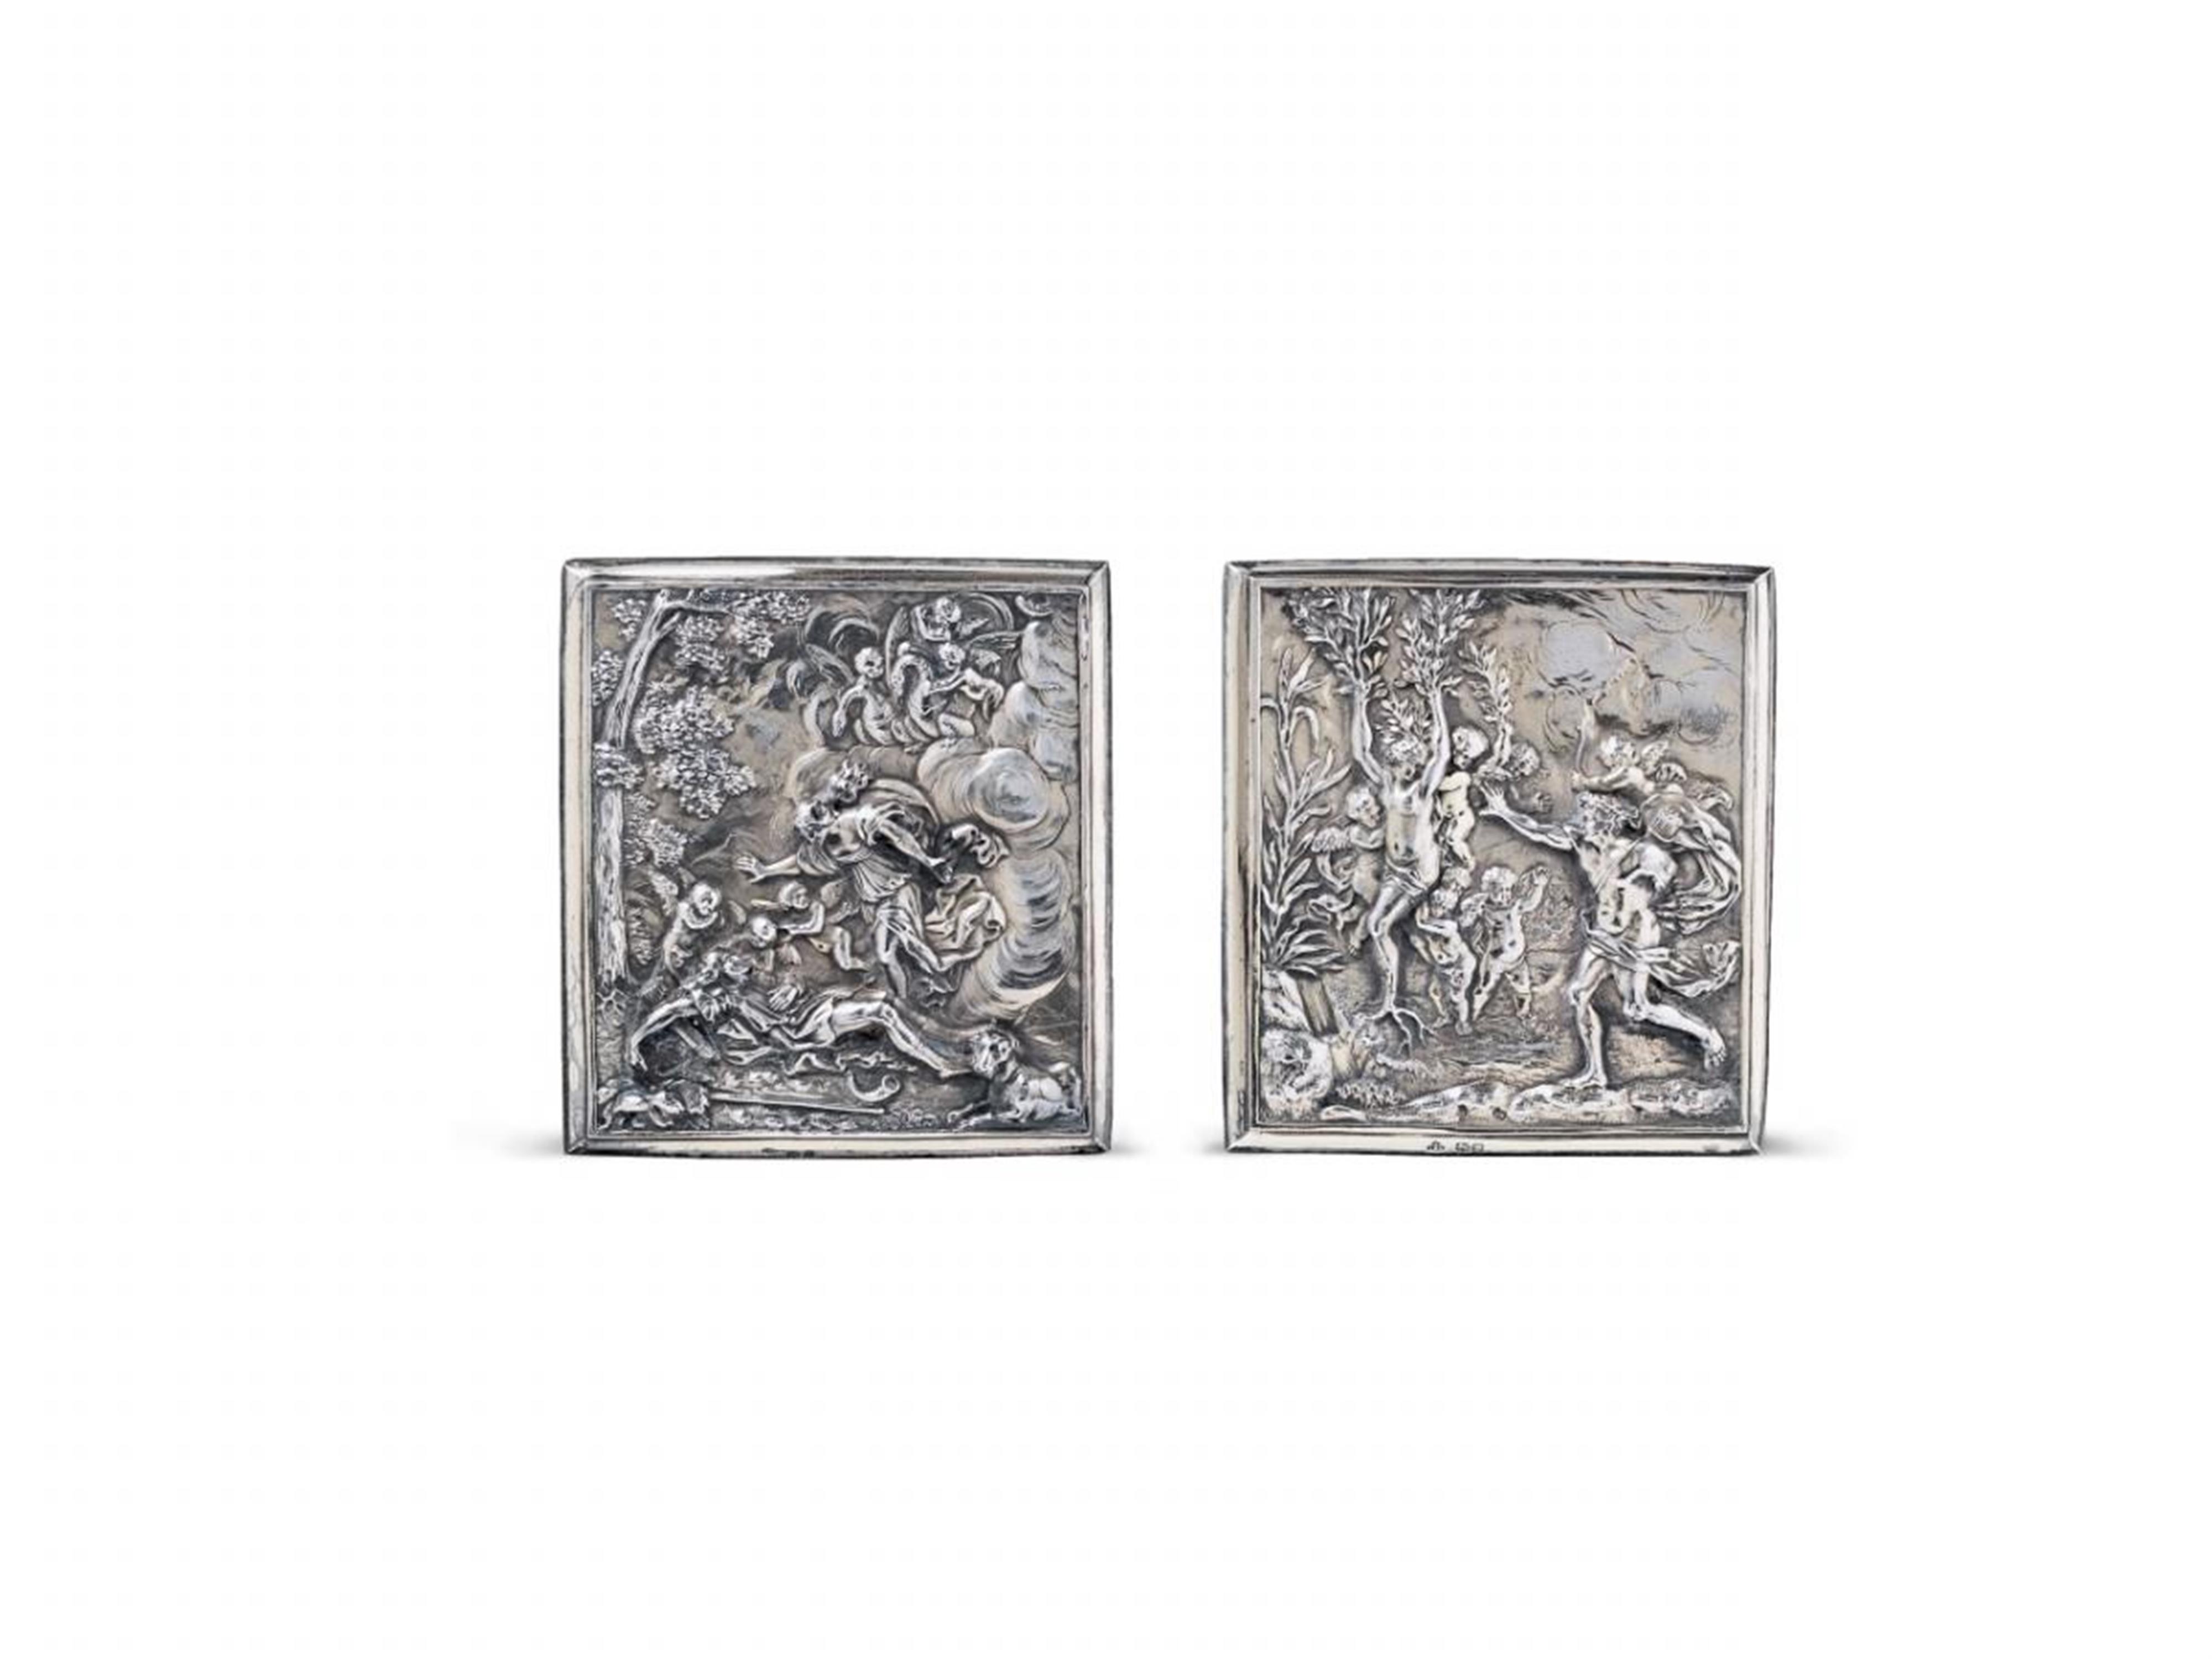 Two Augsburg silver reliefs with remains of gilt. Showing scenes of Venus mourning Adonis and Apollo with Daphne. Apollo's arm lost. Presented in later London silver frames marked John Samuel Hunt, 1853/54. Mounted together on a velvet-covered, gilt frame - image-1